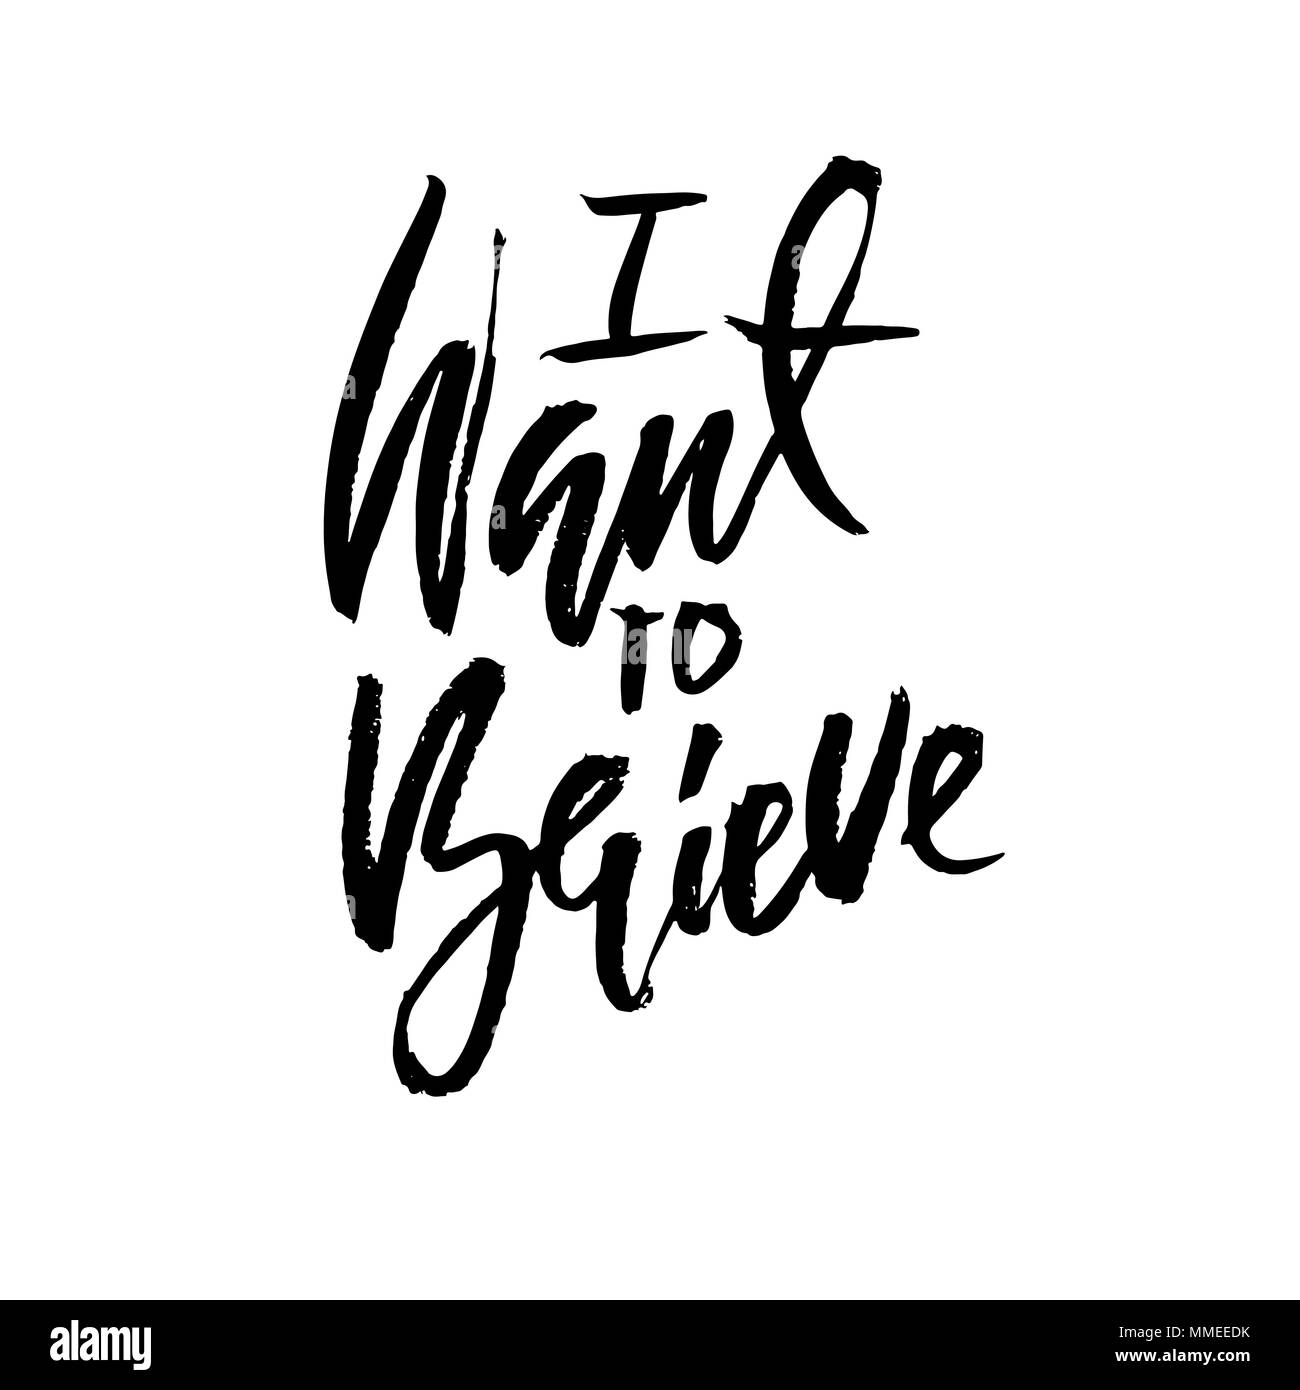 I want to believe. Hand drawn dry brush lettering. Ink illustration. Modern calligraphy phrase. Vector illustration. Stock Vector